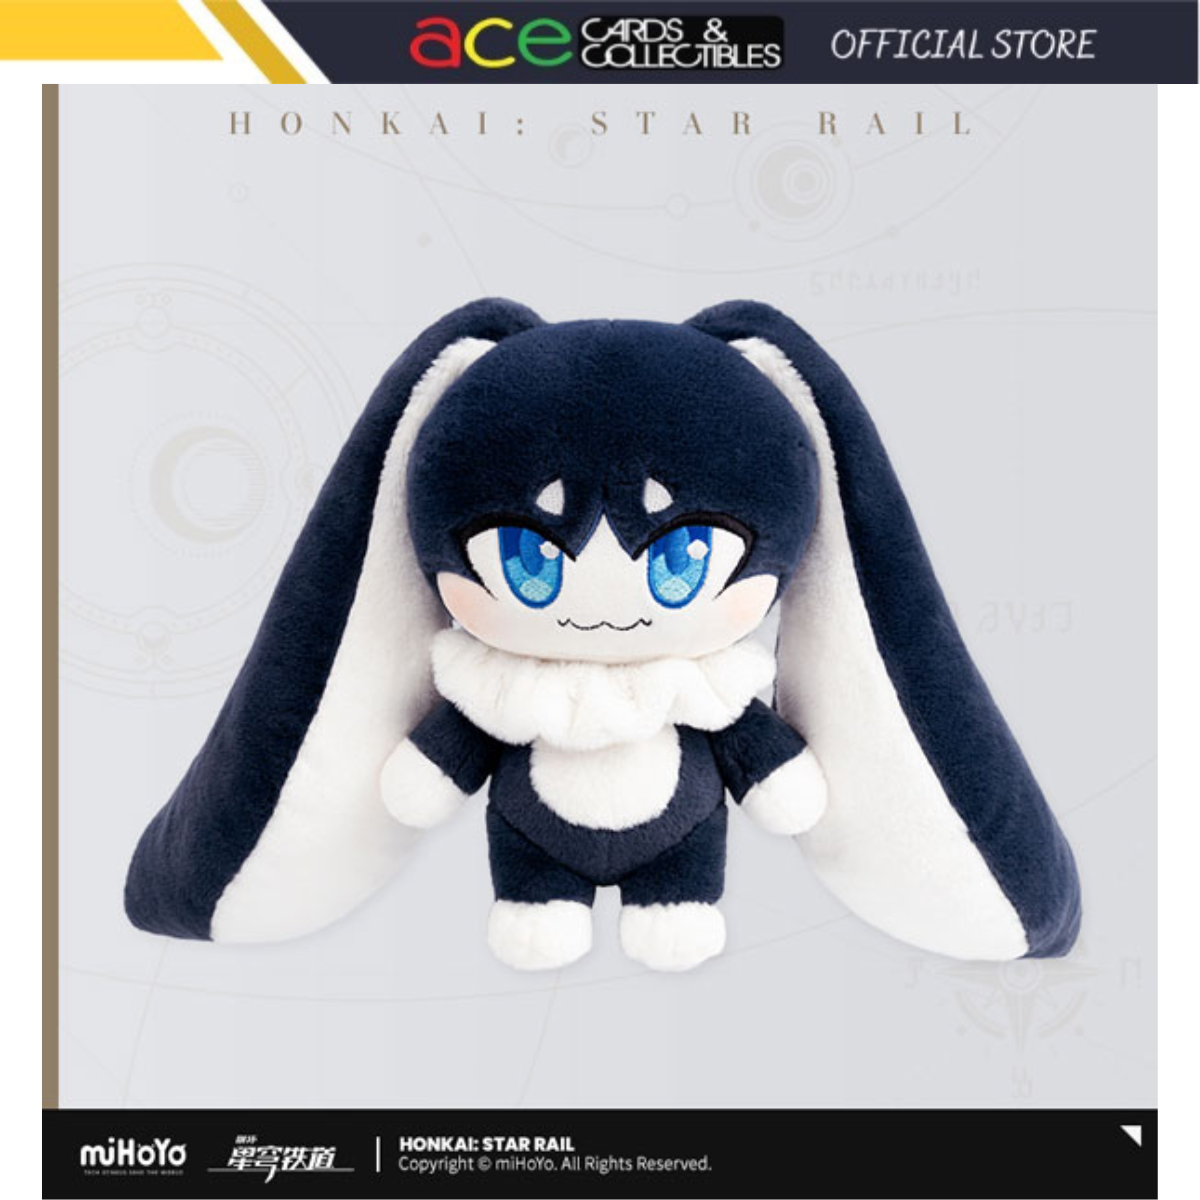 Honkai: Star Rail Pom Pom Plush Doll (Without Outfit Clothe)-miHoYo-Ace Cards & Collectibles